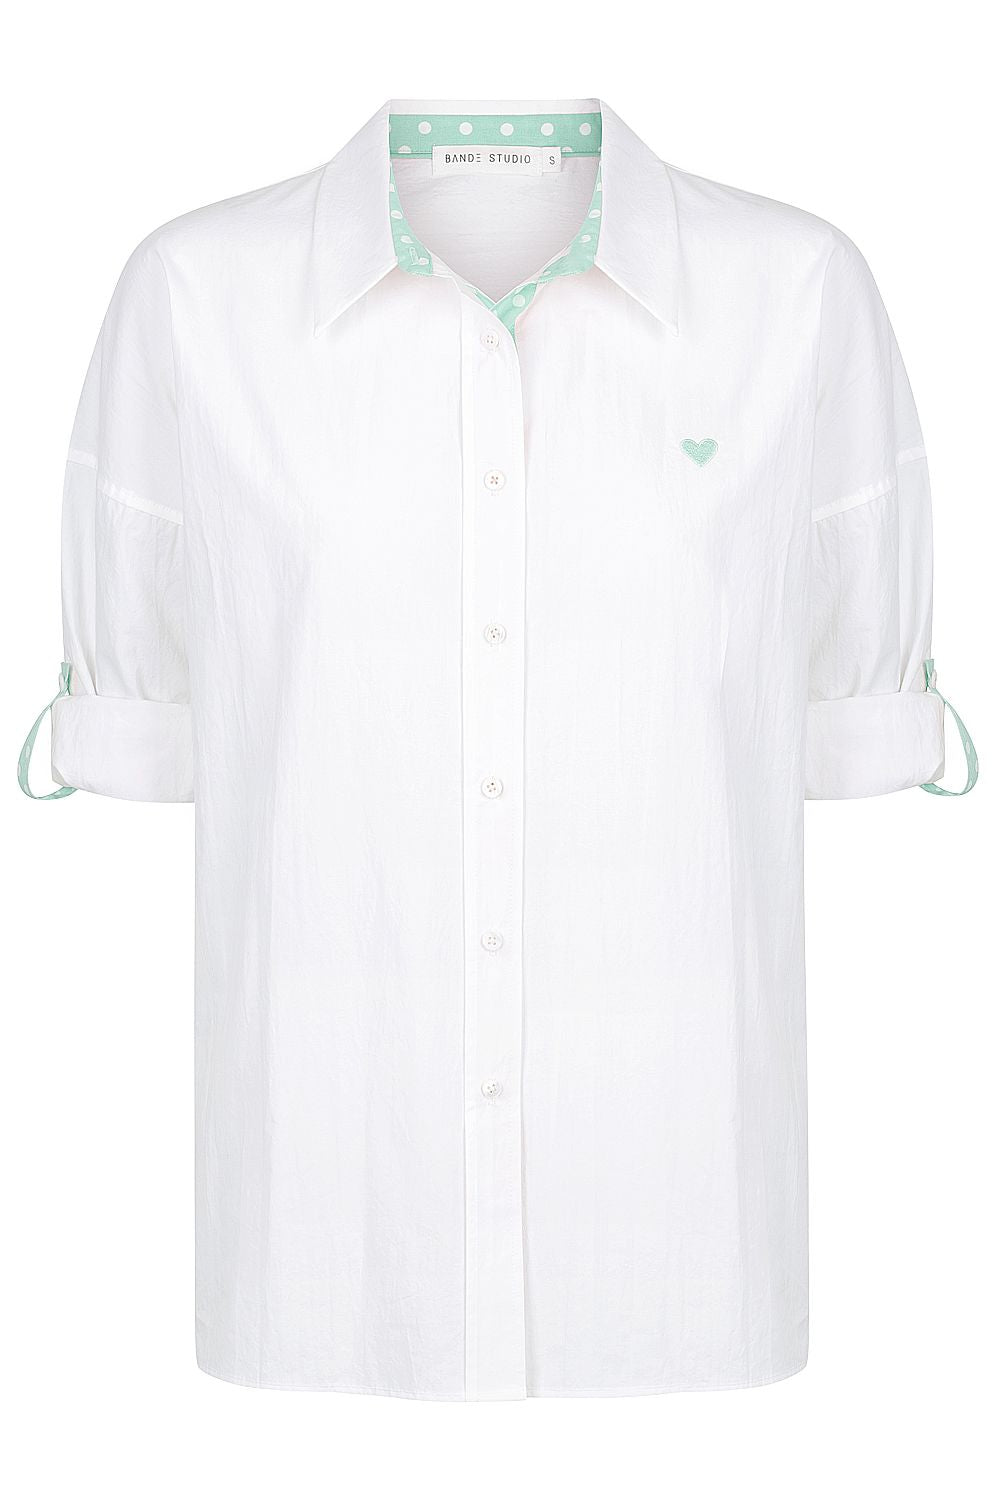 CLASSIC OVERSIZE SHIRT WITH POLKA DOTS -WHITE WITH SAGE POLKA DOTS